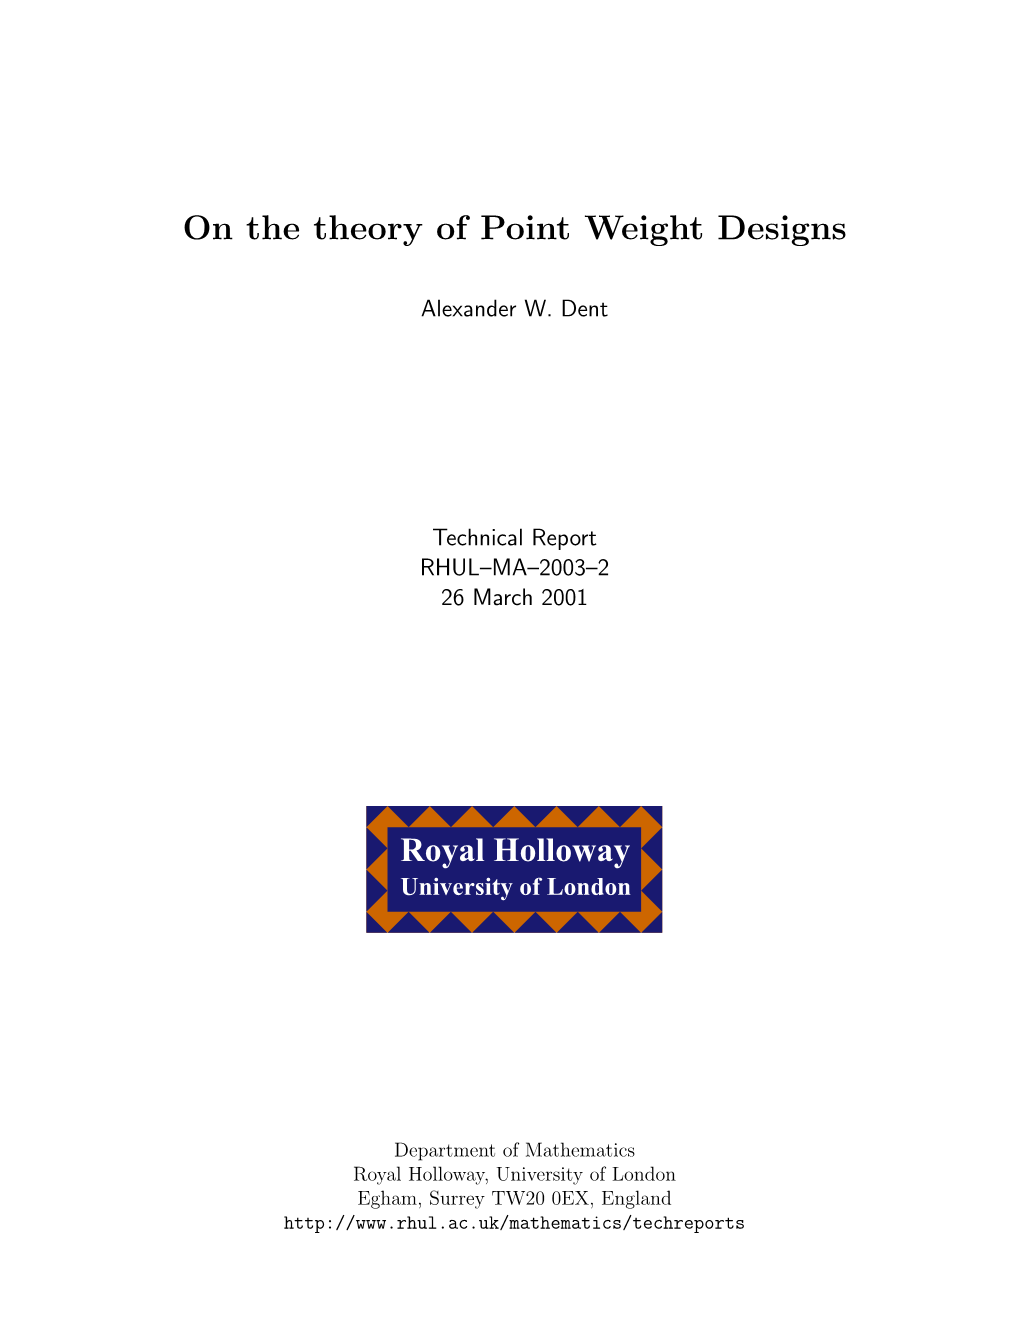 On the Theory of Point Weight Designs Royal Holloway